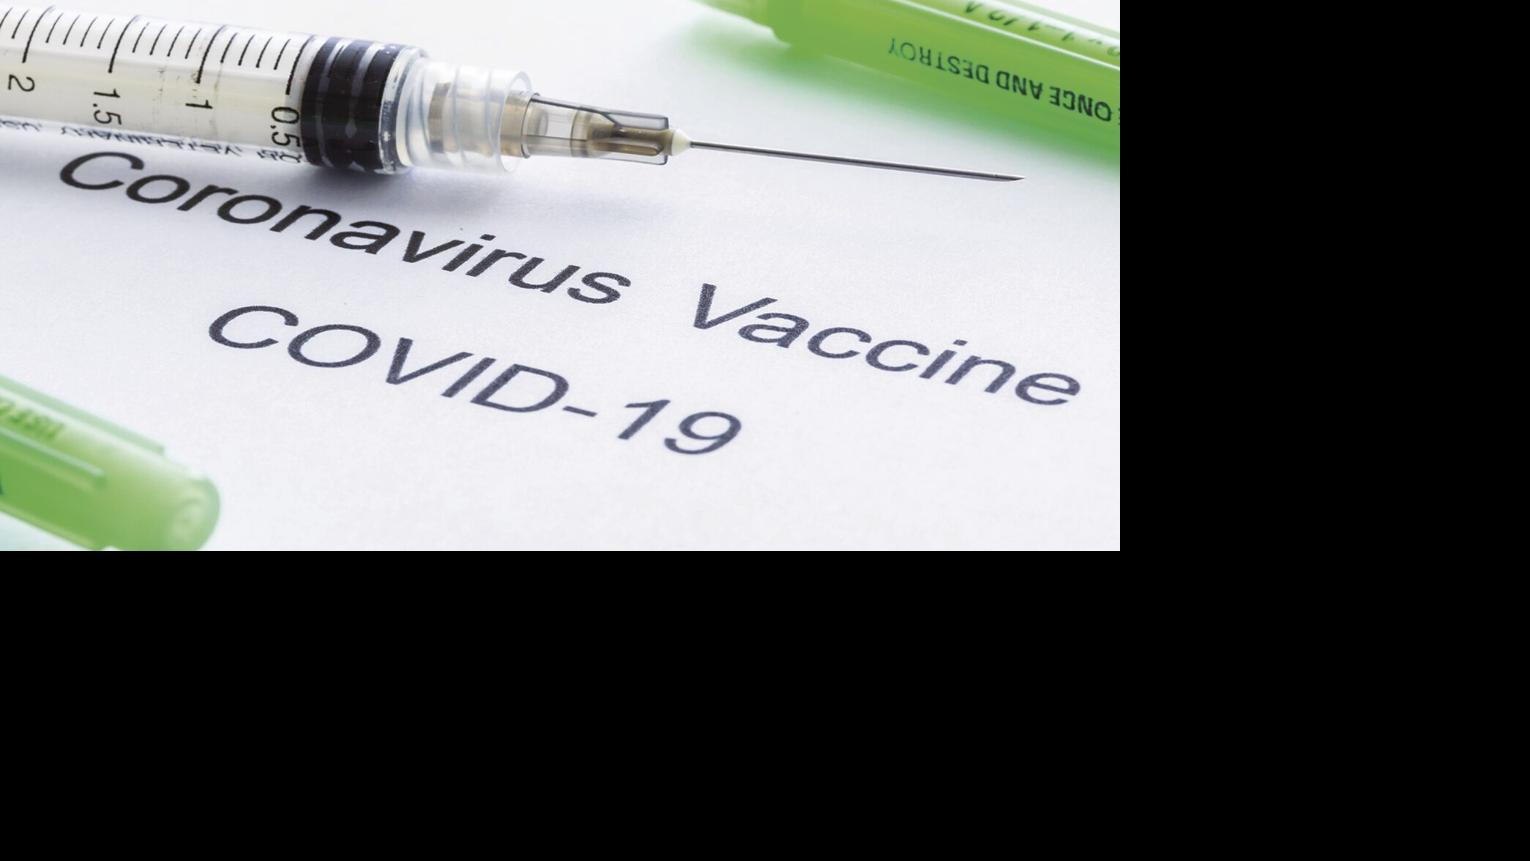 Two Rivers reassures vaccine is coming, albeit slowly